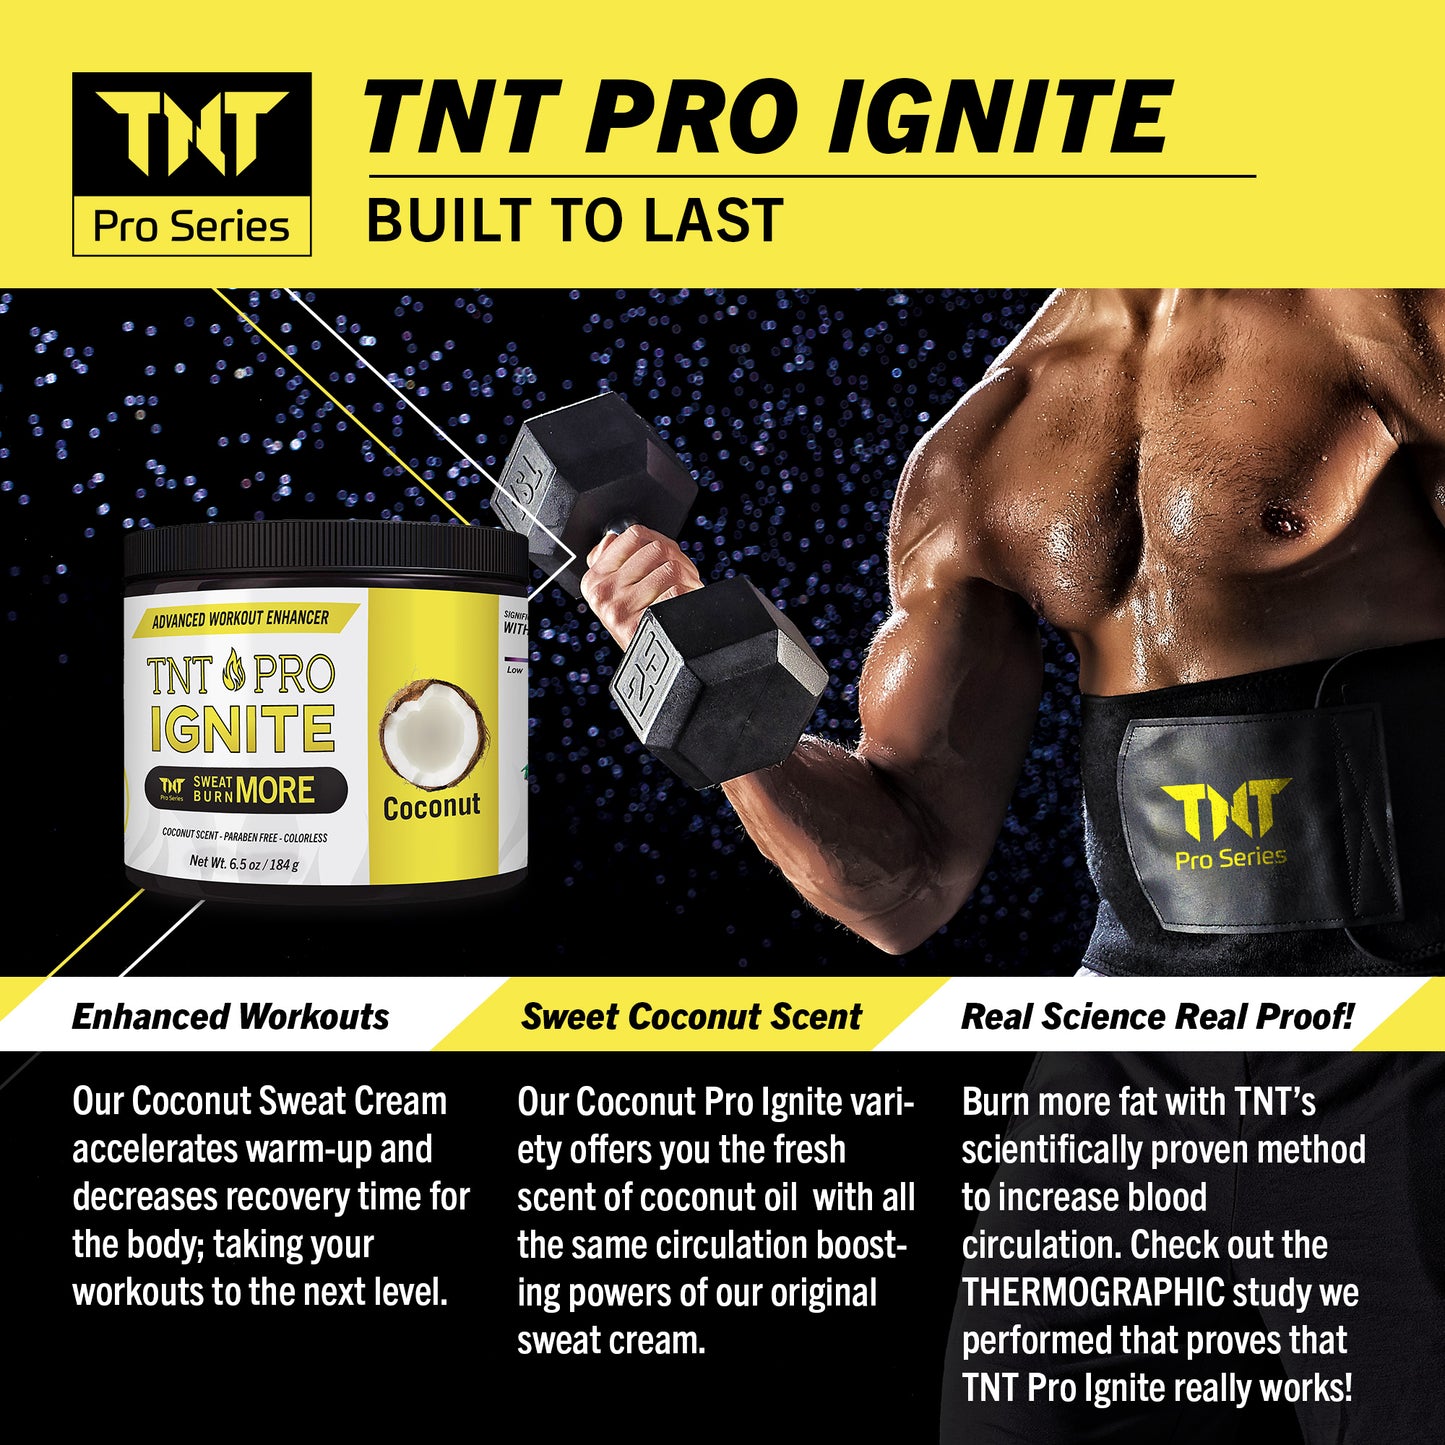 Slimming Cream for Belly with Coconut Oil - TNT Pro Ignite Sweat Cream for Men and Women - Thermogenic Weight Loss Slimming Workout Enhancer for Stomach, Abdominal Burner - TNT Pro Series